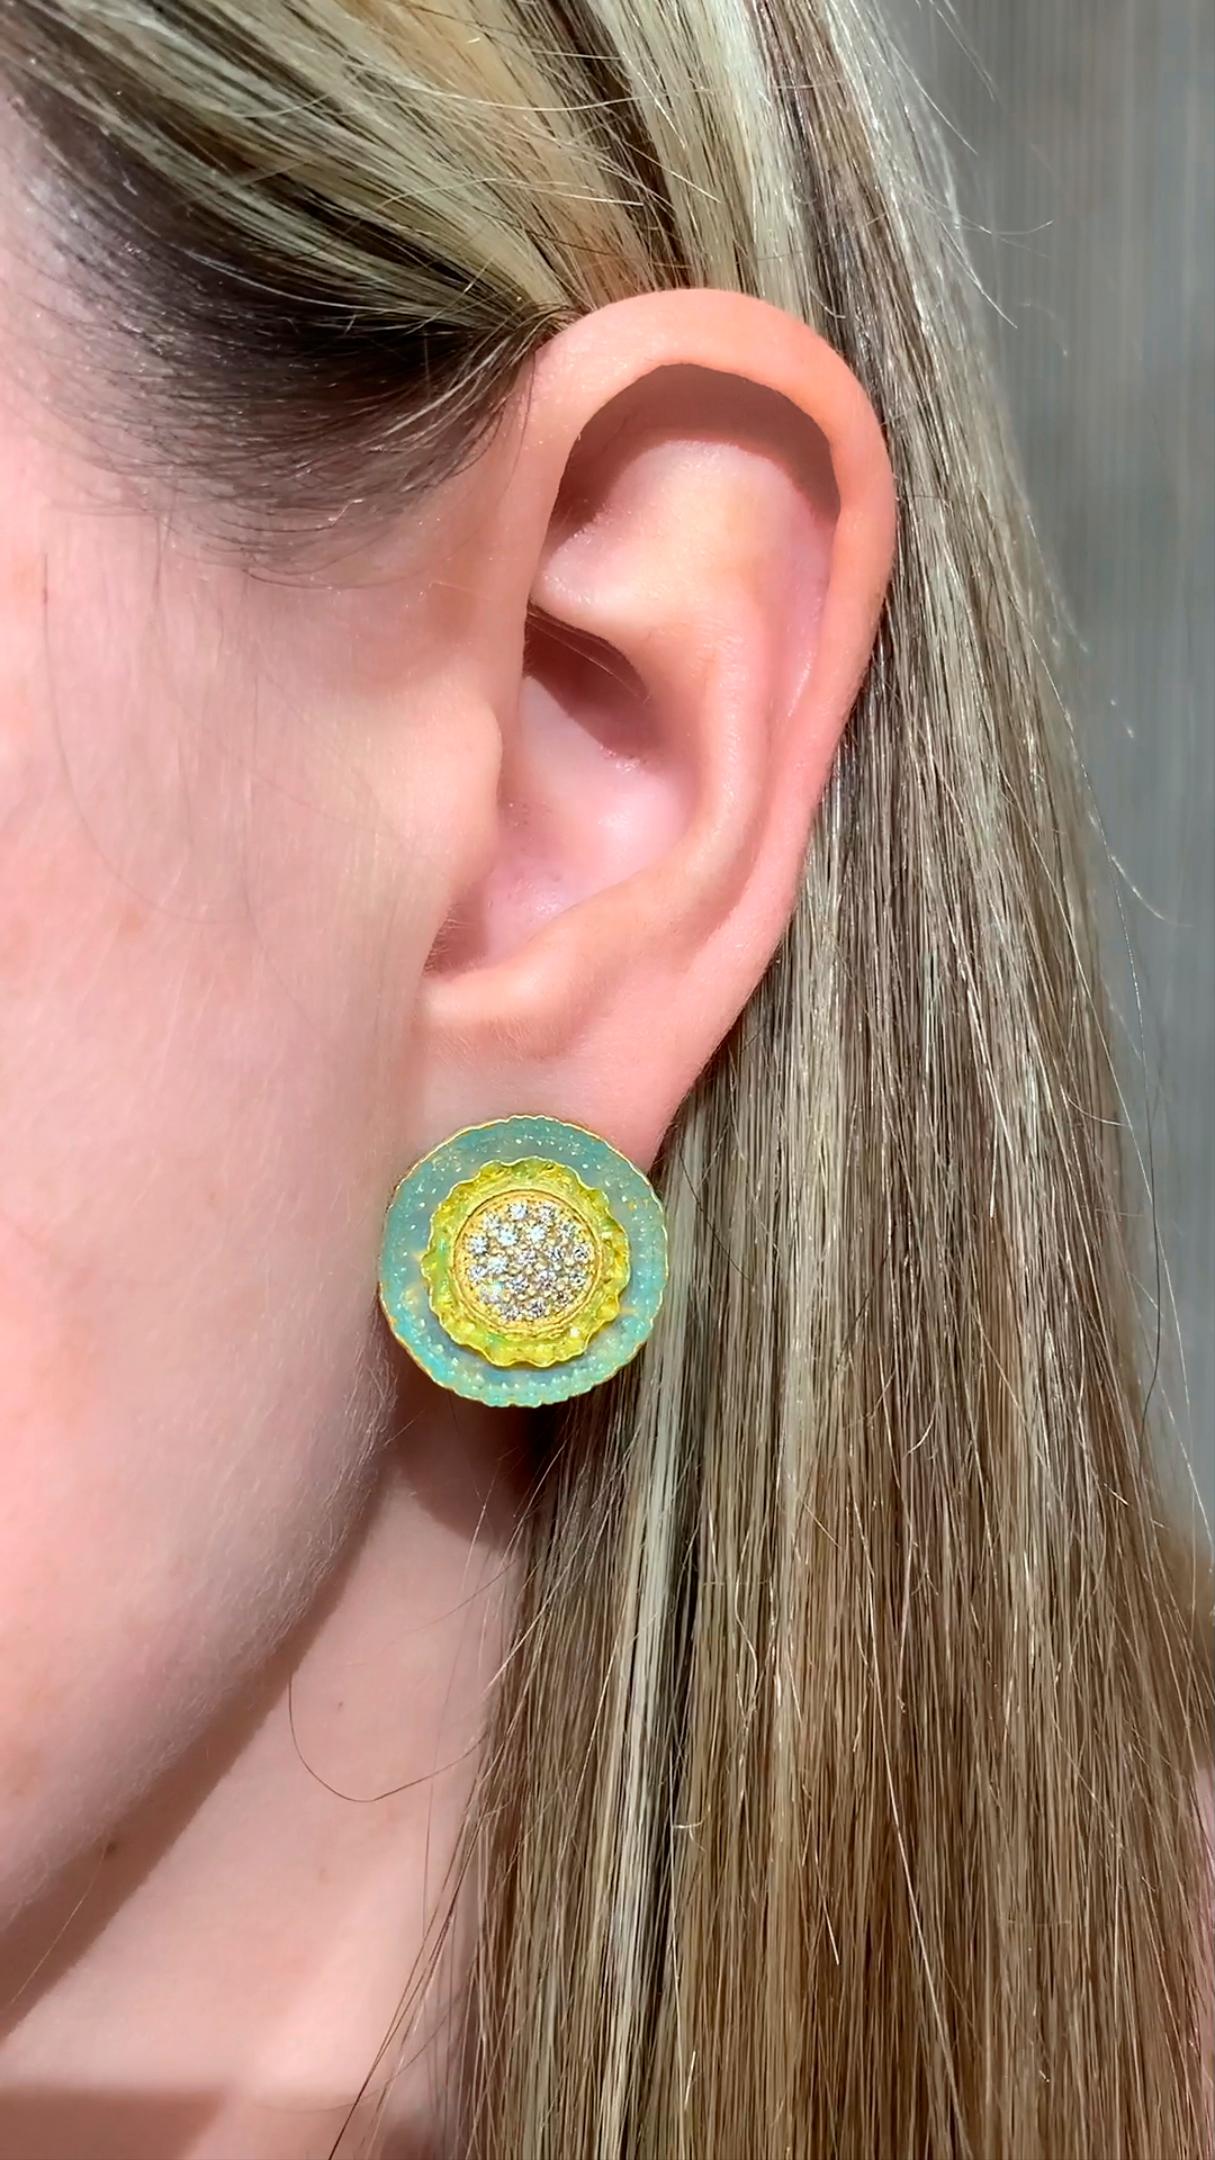 One-of-a-Kind flower earrings by master jewelry artist Eva Steinberg intricately handcrafted in 21k yellow gold featuring a gorgeous turquoise bluish green golden opalescent enamel flower-pressed outer edge surrounding inner yellow and green